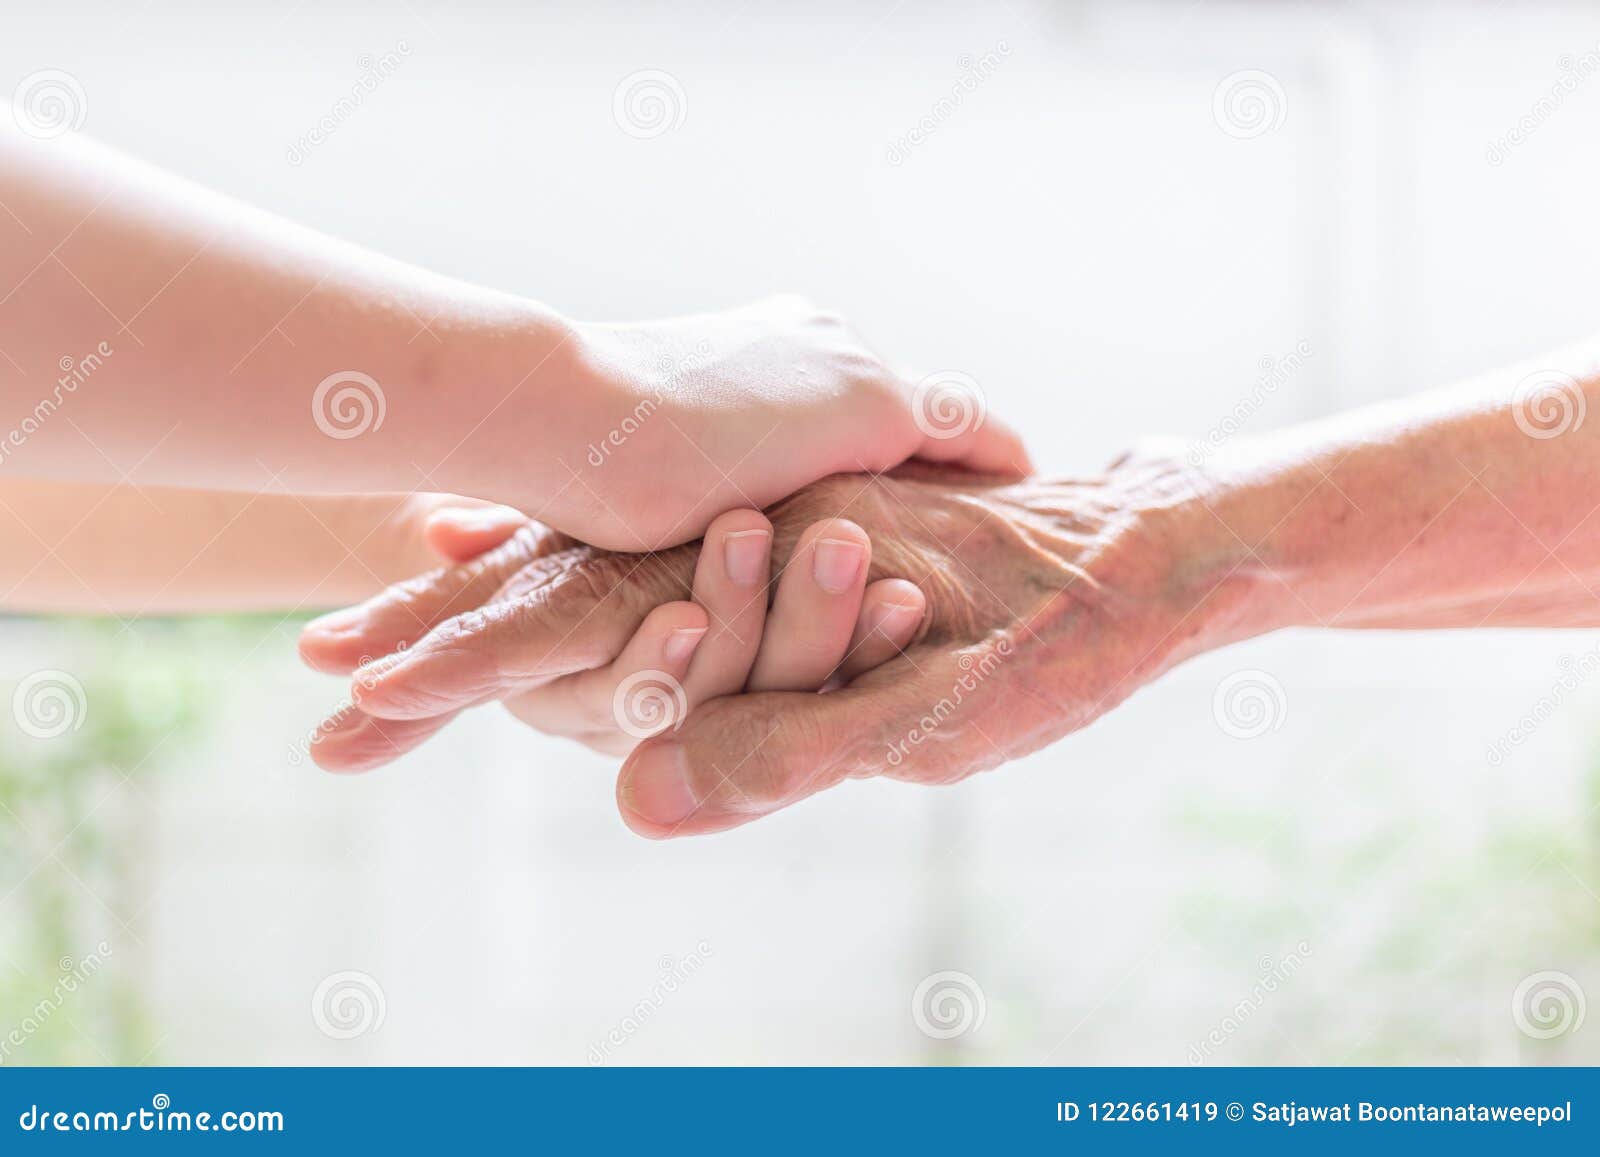 close up of young woman hand holding with tenderness an elderly